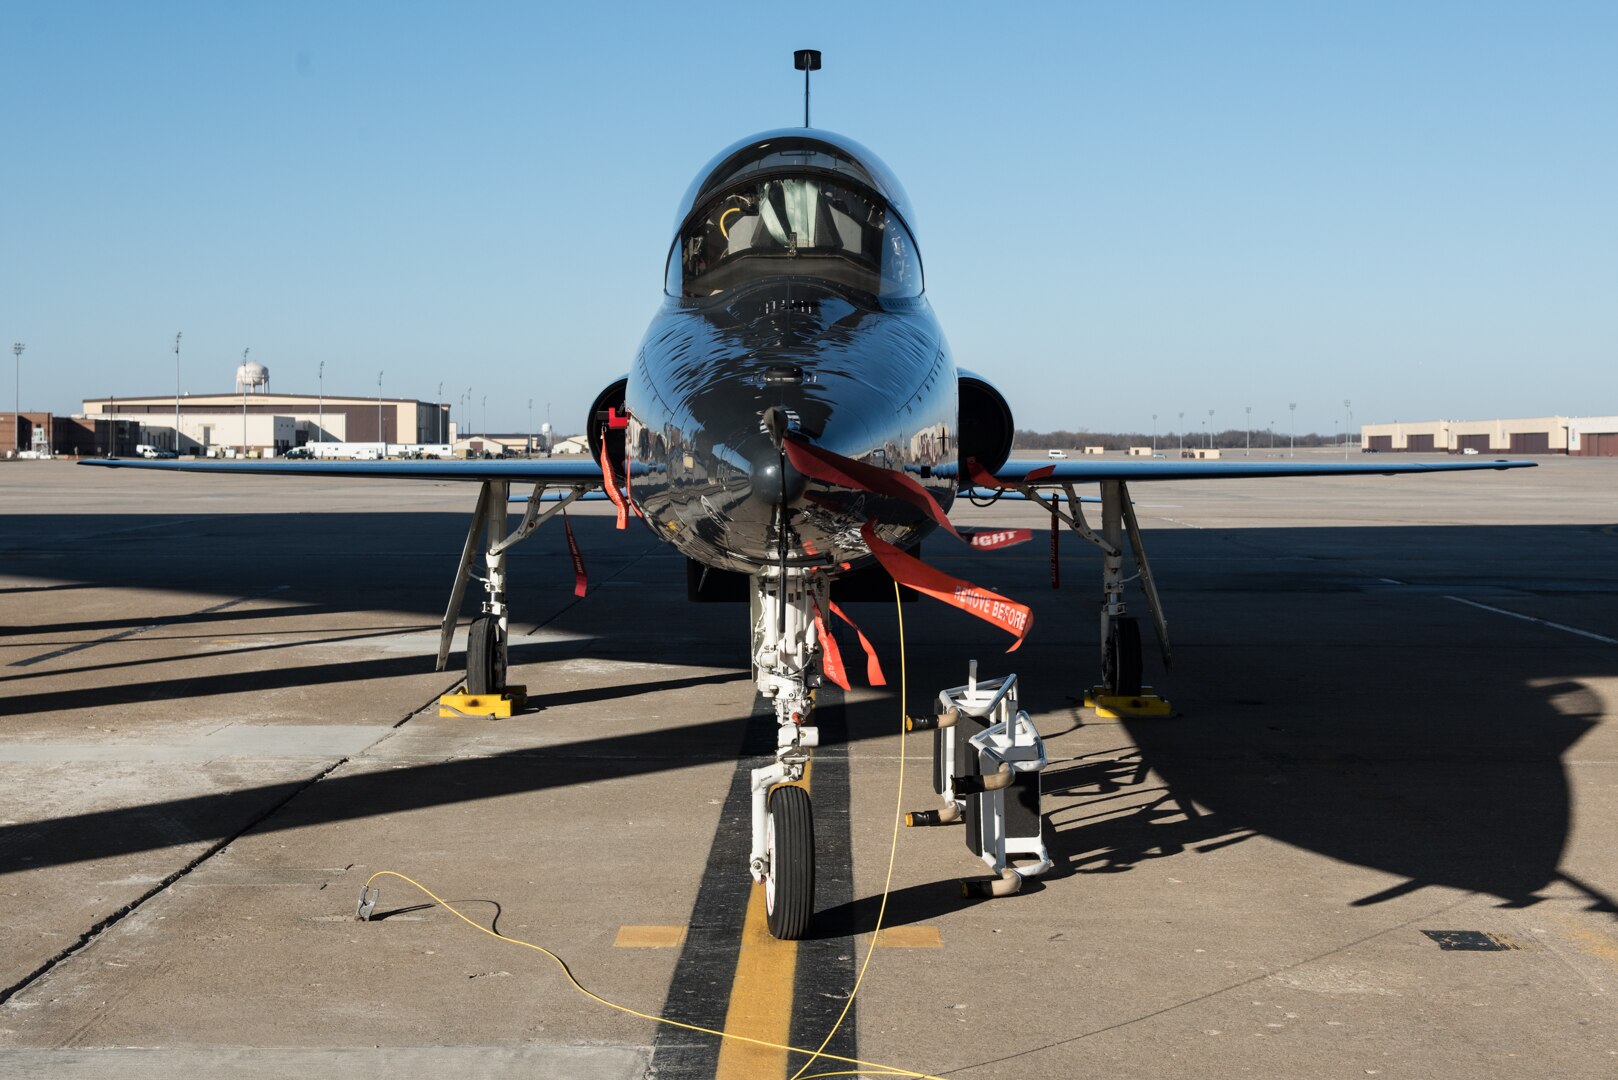 A T-38 Talon sits under the hardstand at Whiteman Air Force Base, Missouri, Jan. 12, 2021.  The Fiscal Year 2024 Defense Logistics Agency Military Construction project will enable R-12 refueling of T-38 aircraft near their parking apron with the new aircraft hydrant outlet pits. (U.S. Air Force photo by Airman 1st Class Christina Carter)